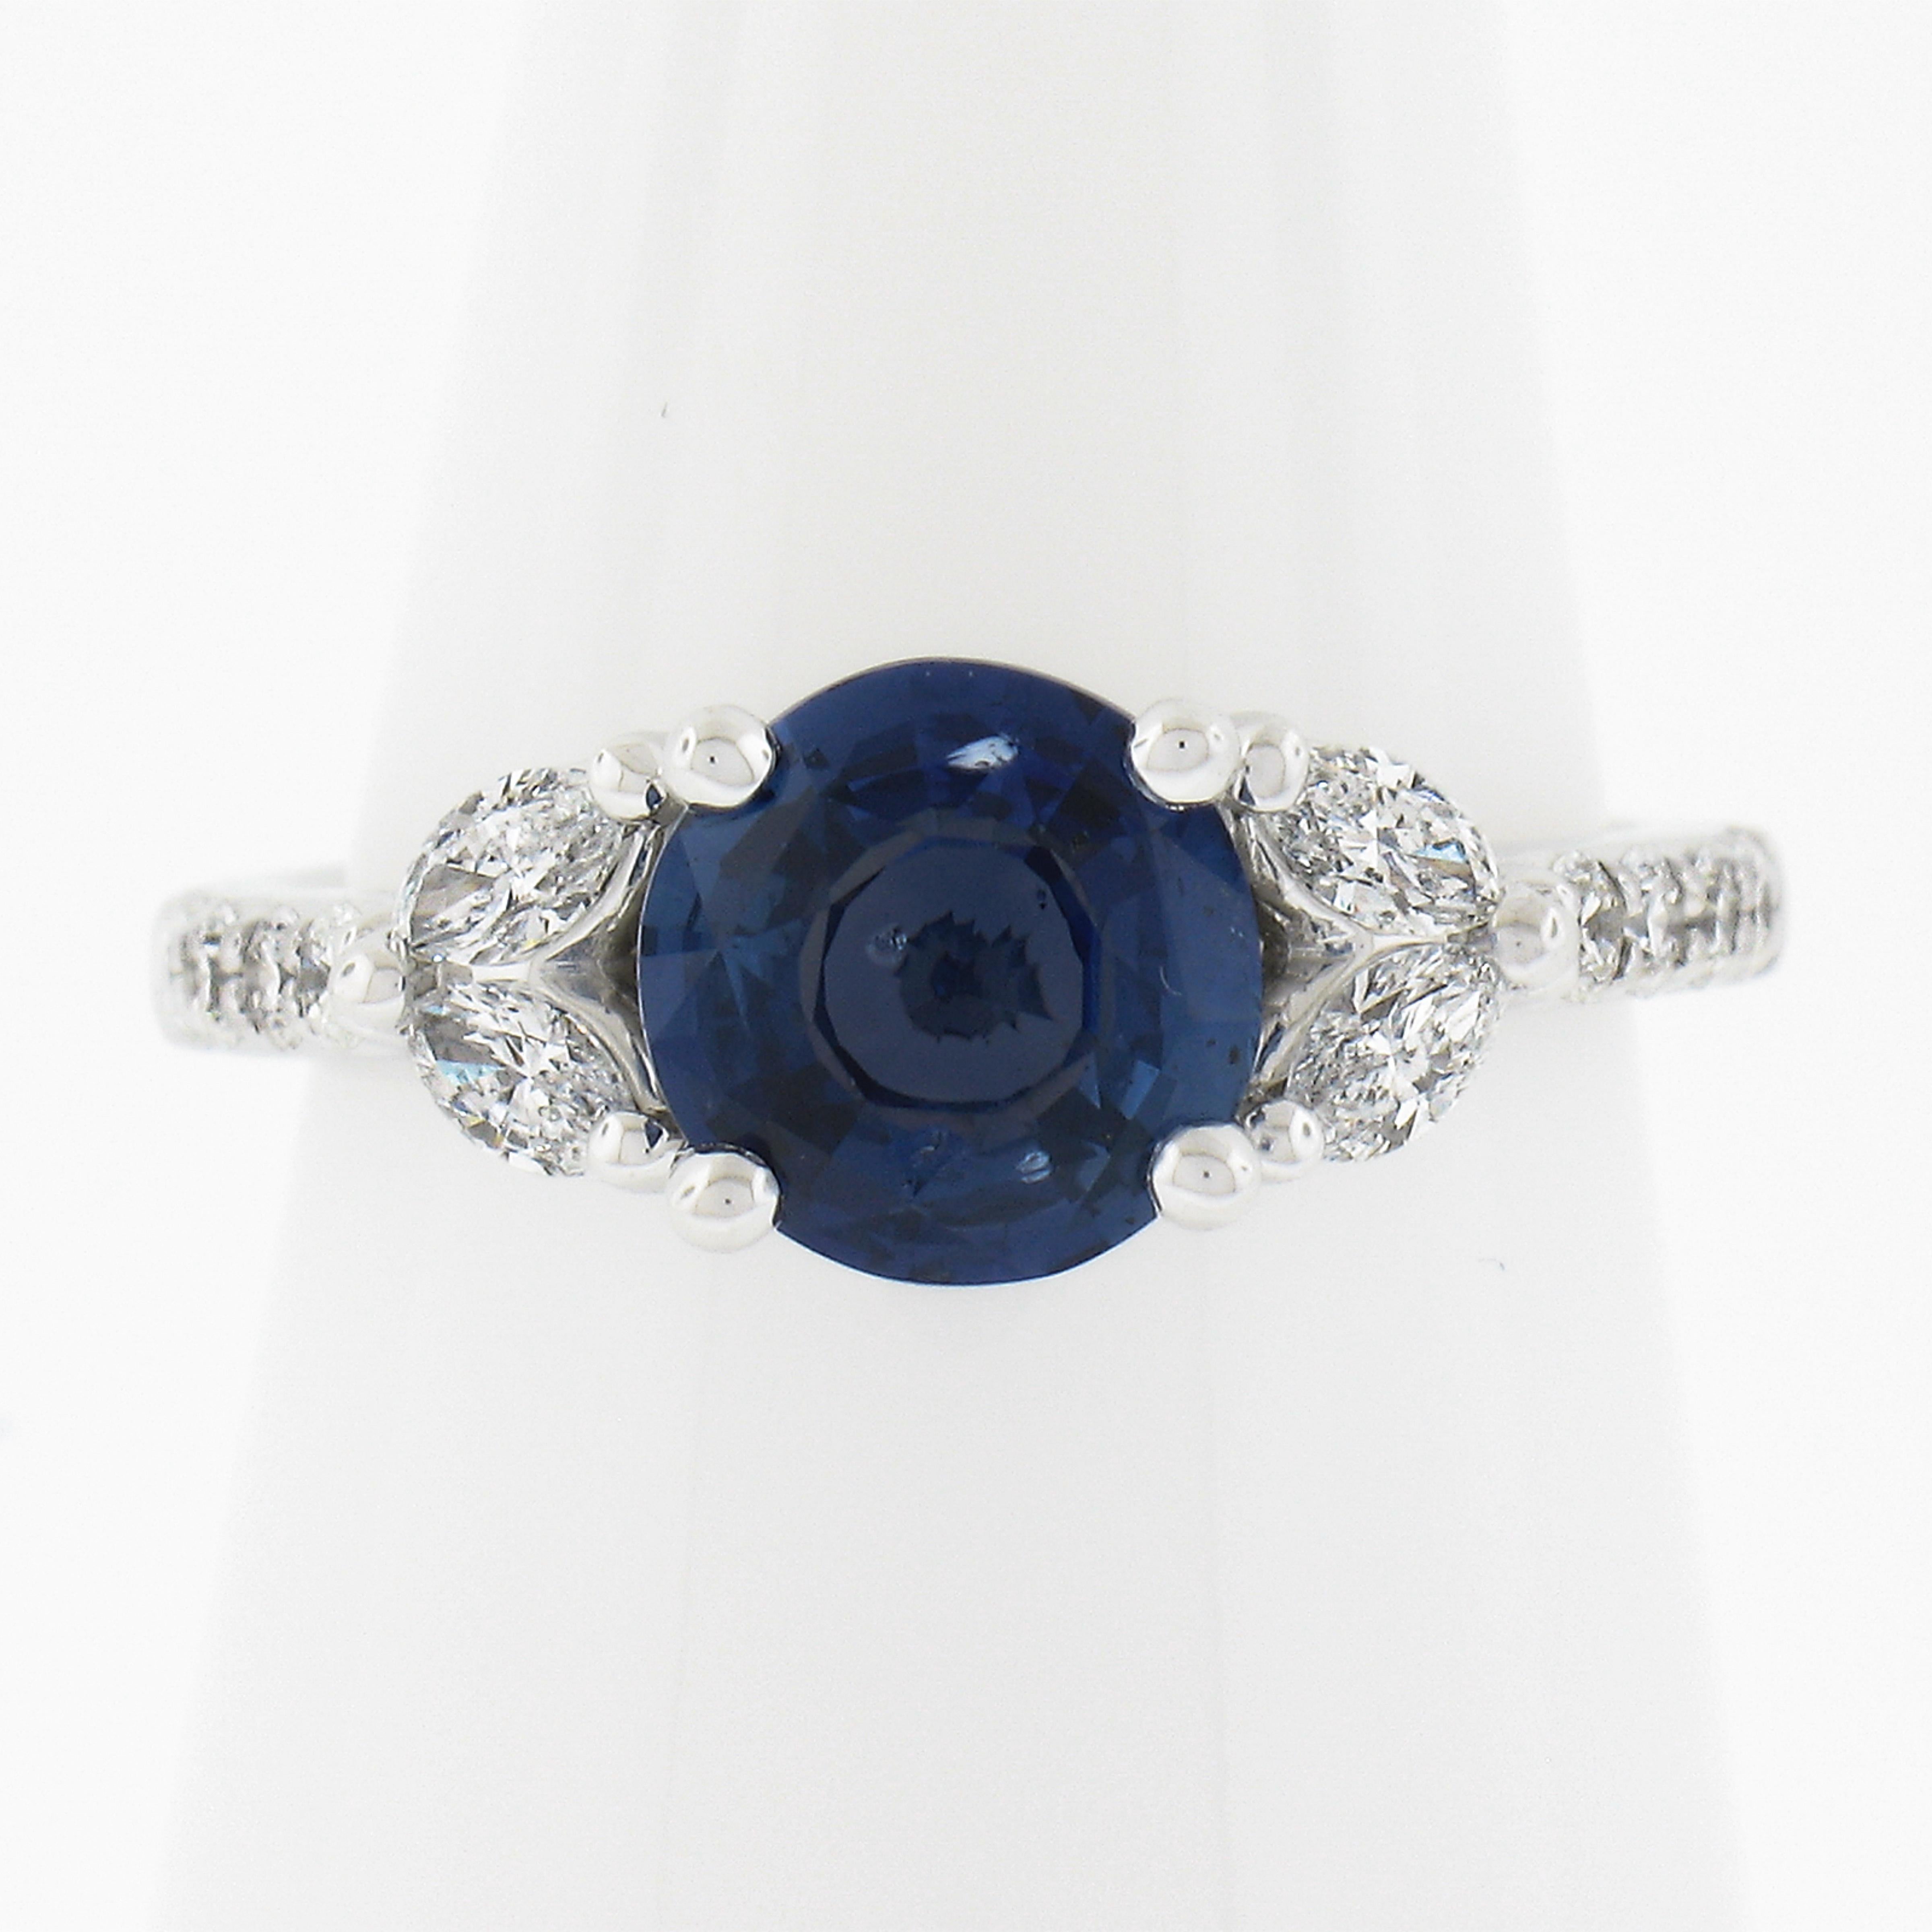 --Stone(s):--
(1) Natural Genuine Sapphire - Round Brilliant Cut - Prong Set - Very Nice Clean Blue Color - No Heat - 2.03ct (exact - certified)
** See Certification Details Below for Complete Info **
(16) Natural Genuine Diamonds - 12 Round